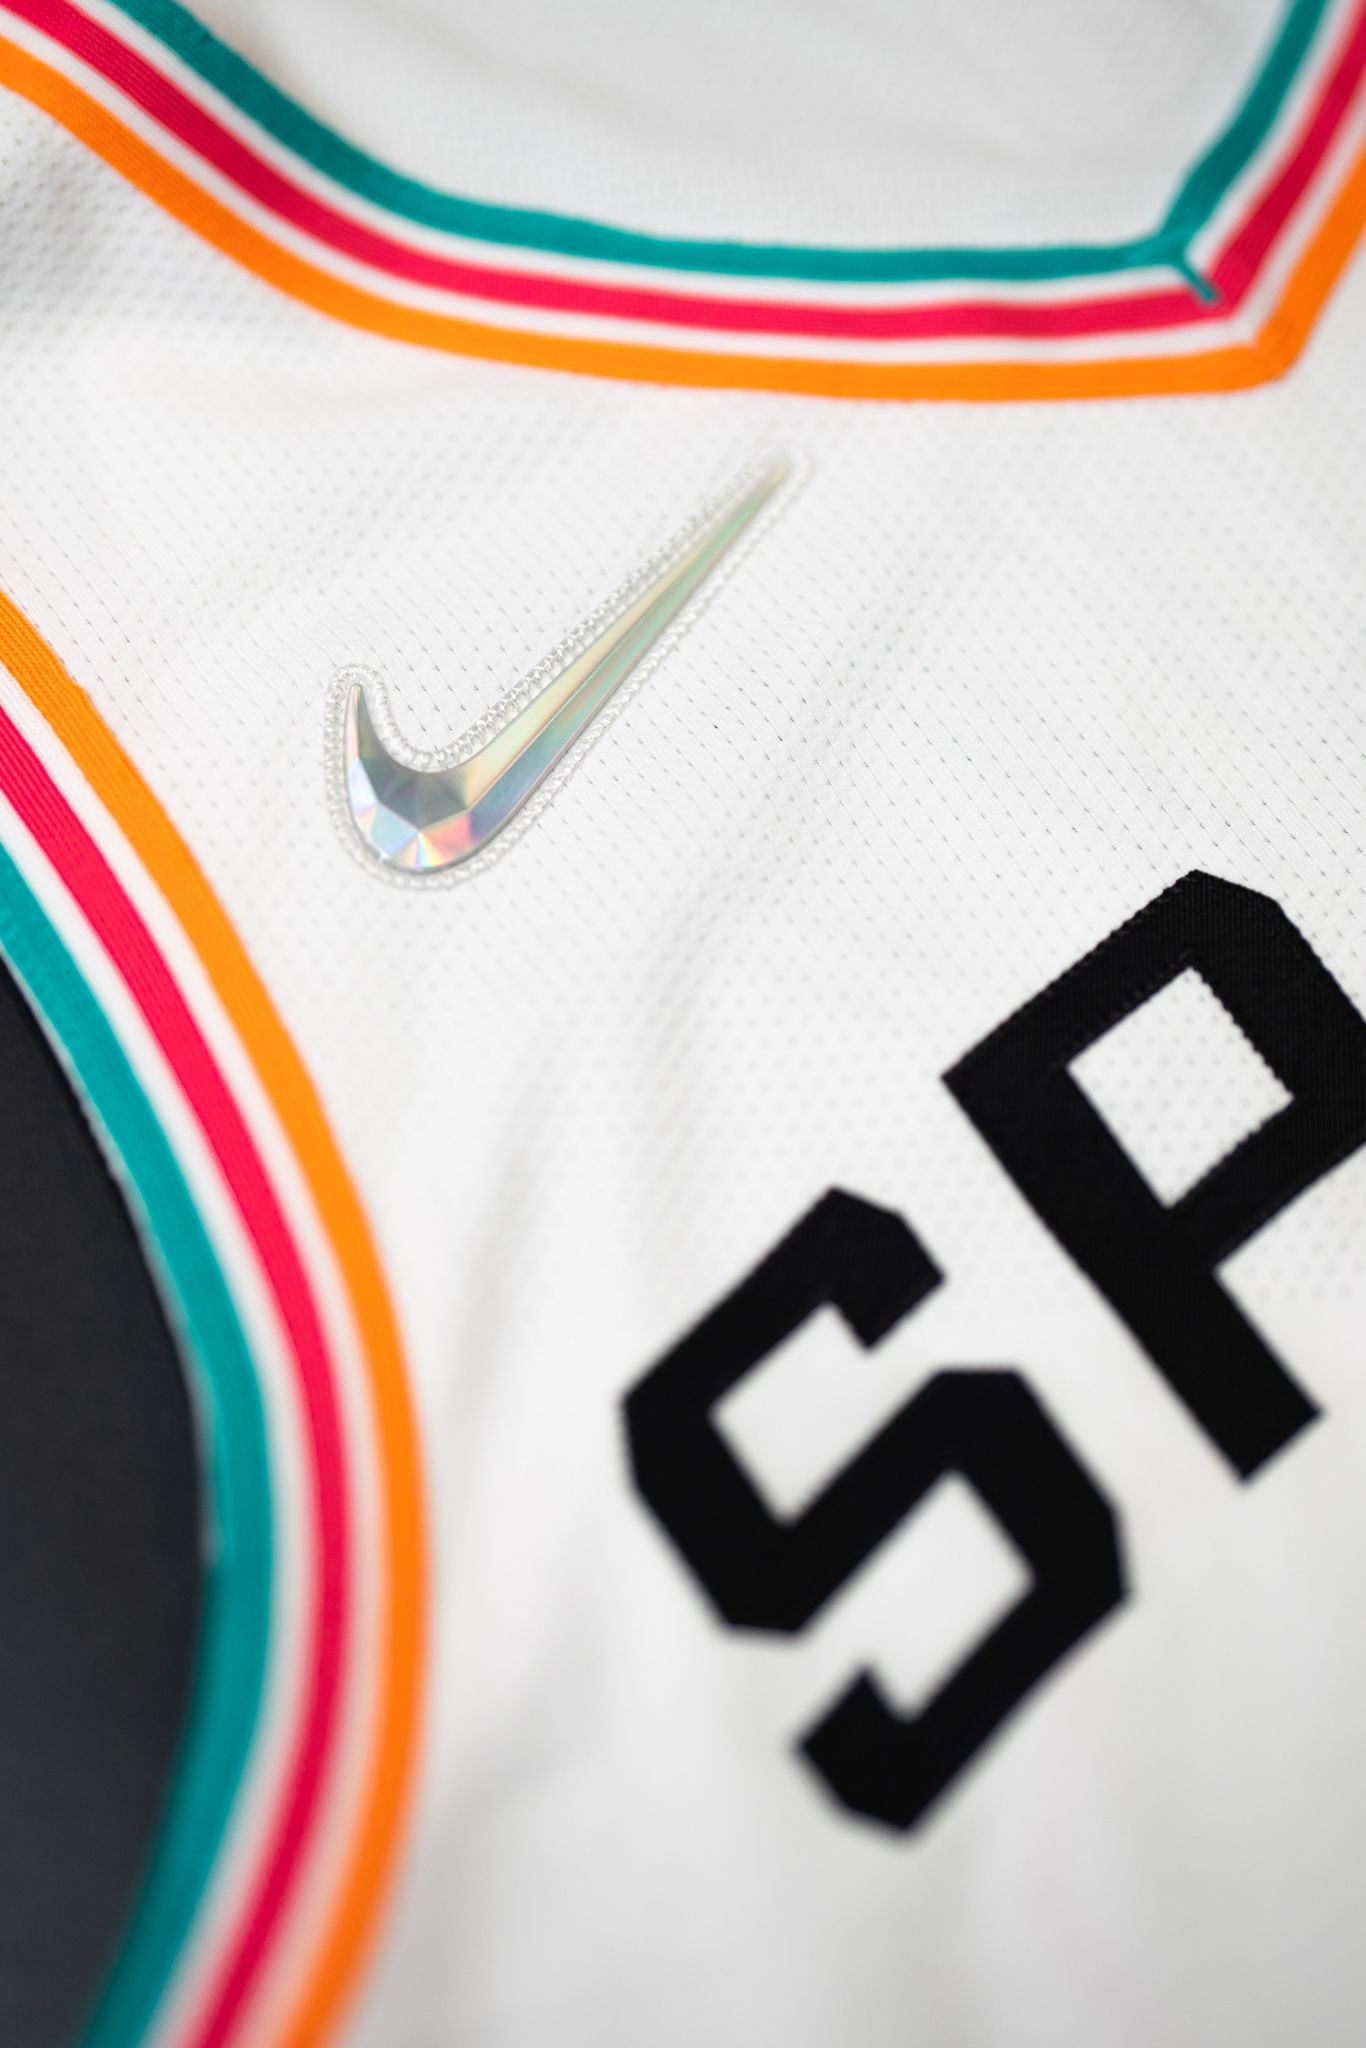 Spurs unveil fiesta-themed City Edition uniforms based on 1996 All